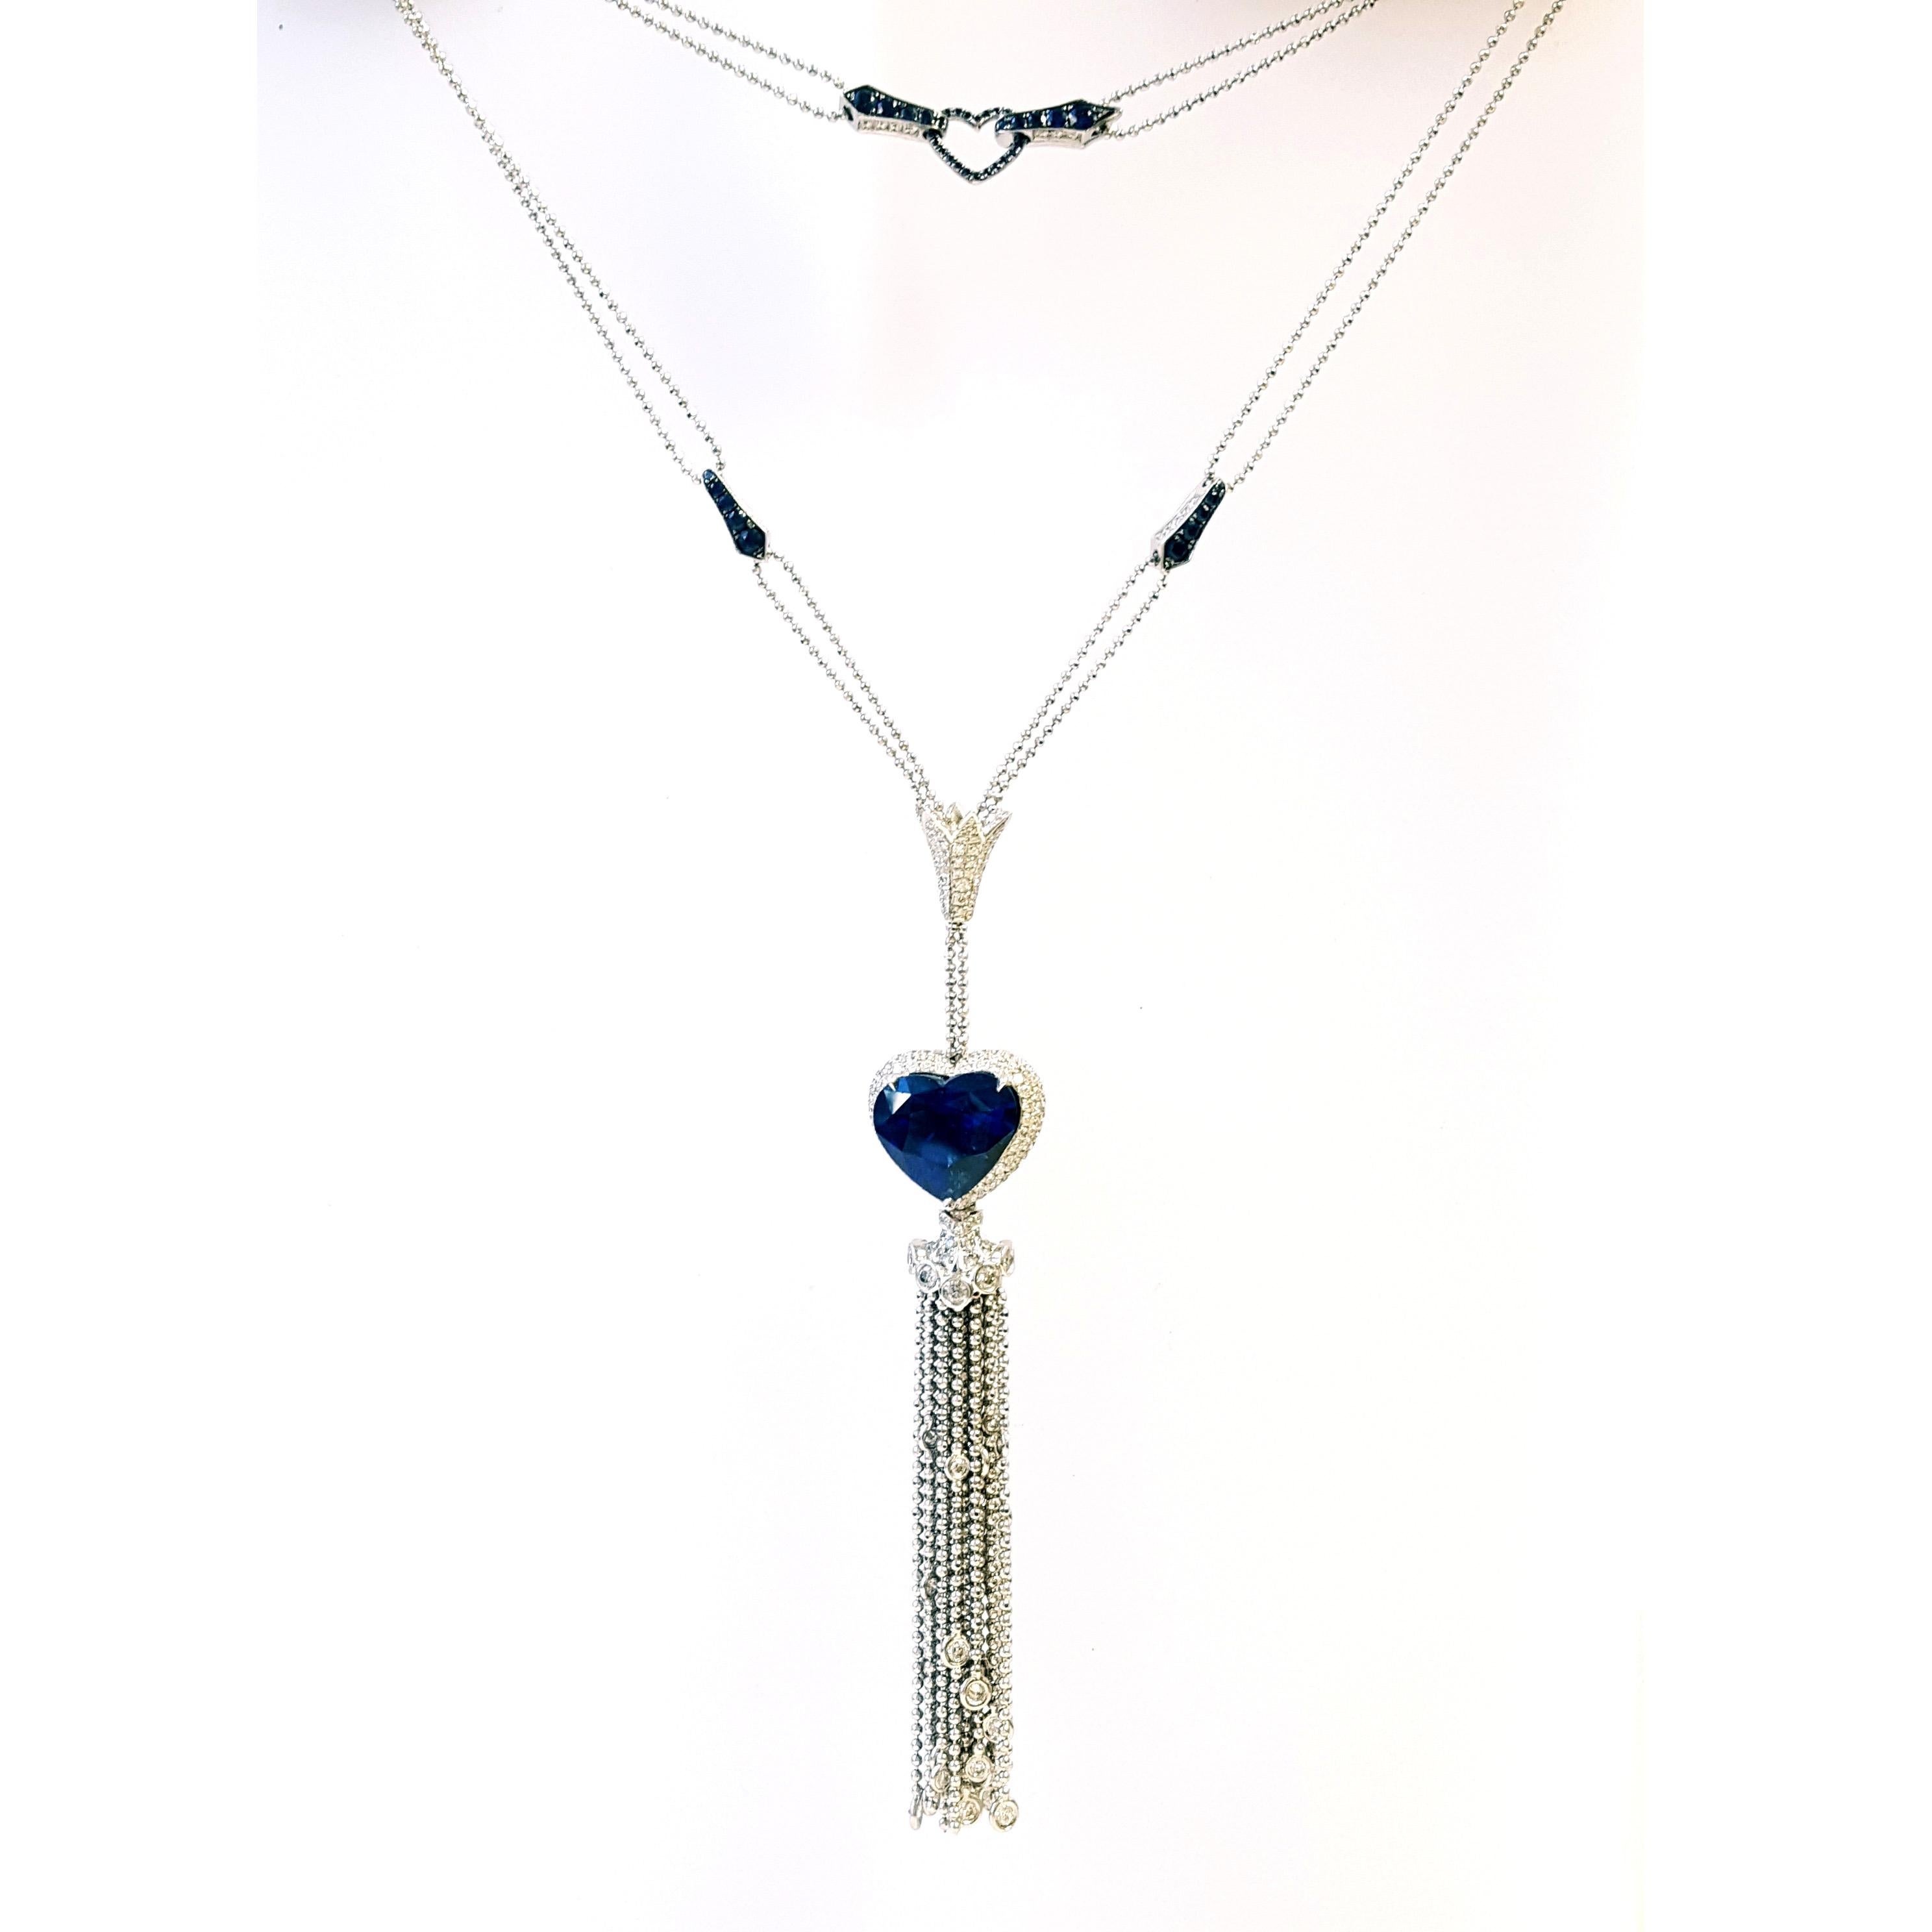 Contemporary 12.80 Carat Sapphire & Diamond Tassel Necklace RGS Certified, 18K White Gold. For Sale